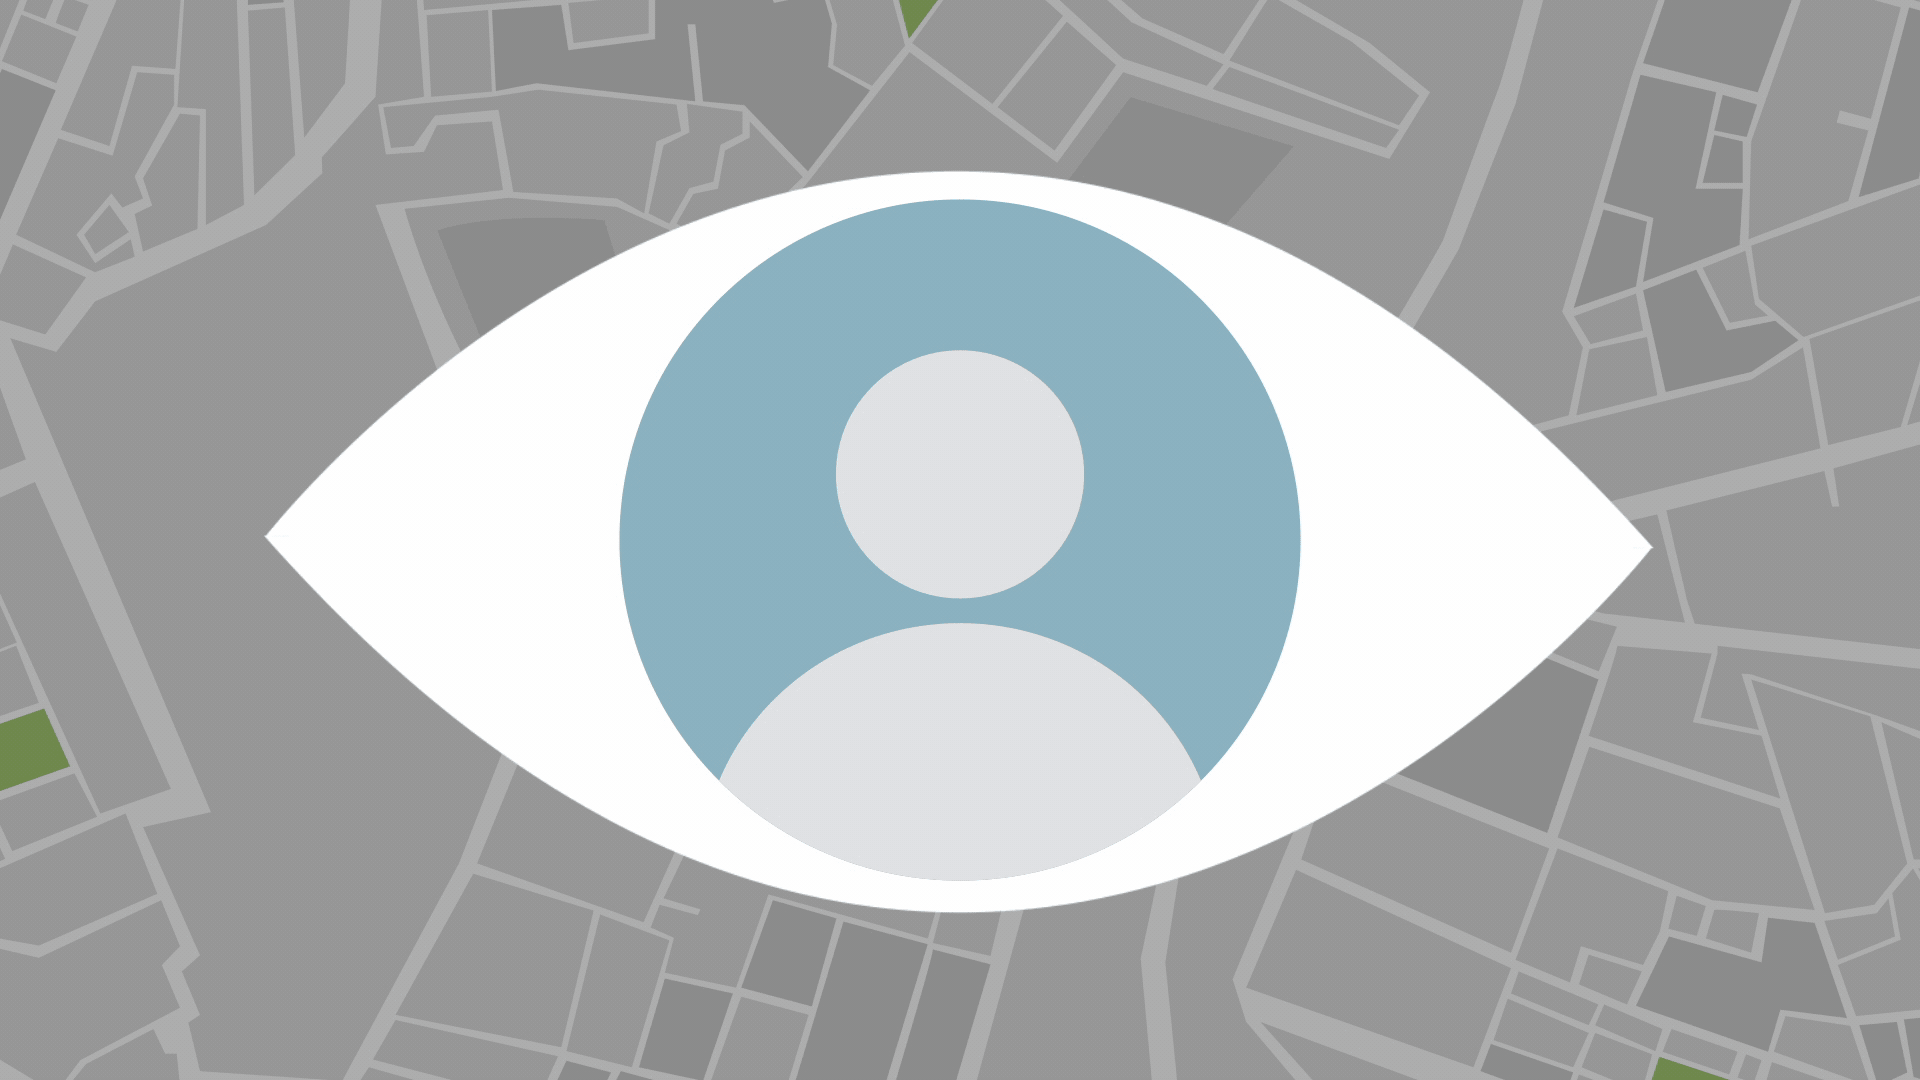 Animated illustration of an eye with an avatar icon as a pupil against a map background. Glowing concentric circles surround the pupil.